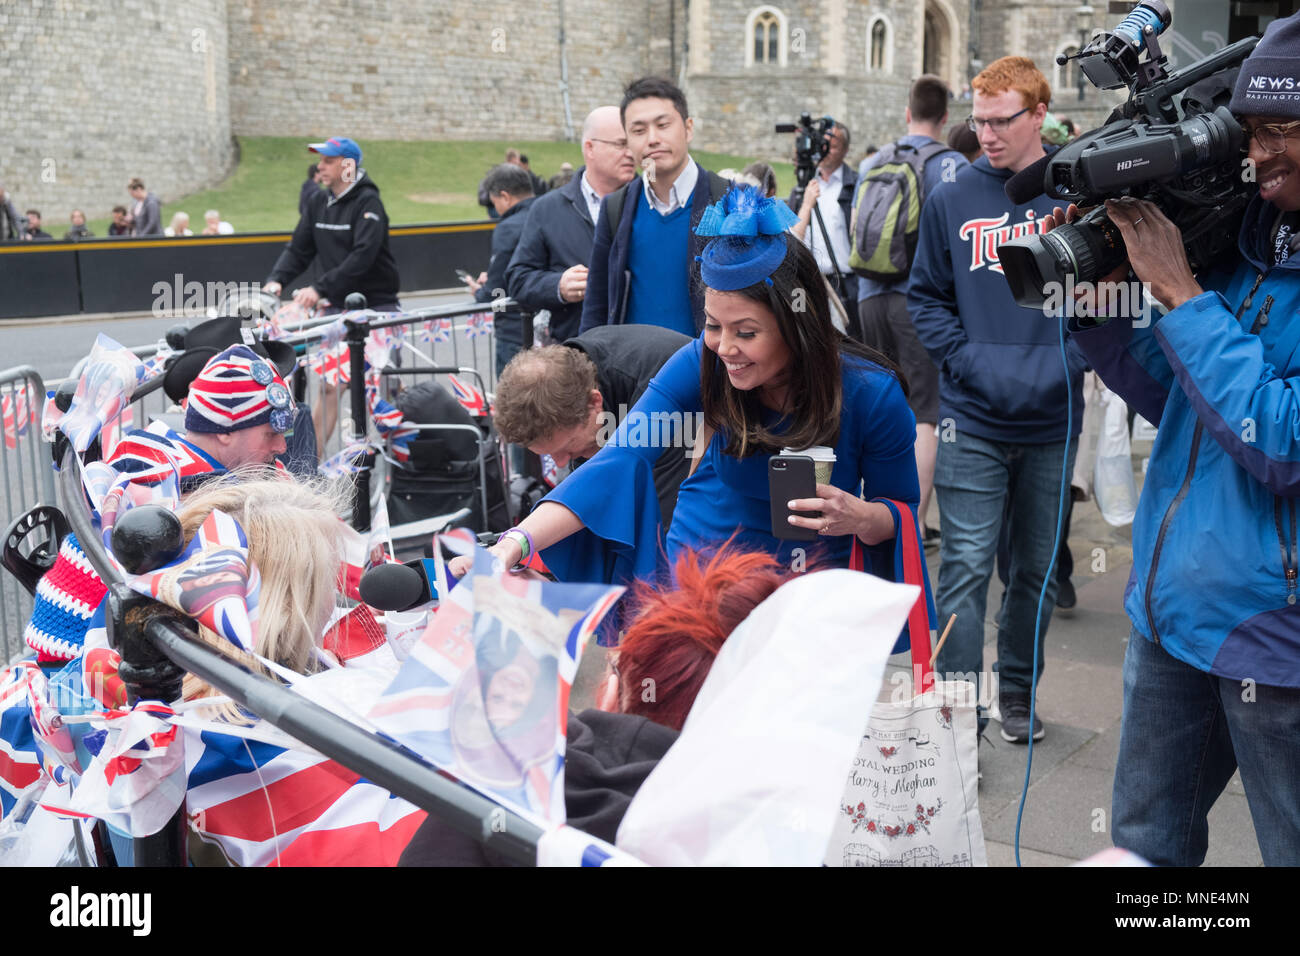 Royal Wedding preparations in Windsor town centre. Early Royal fans are staking claim to viewing spots and happy to be interviewed by multiple media personnel. Stock Photo